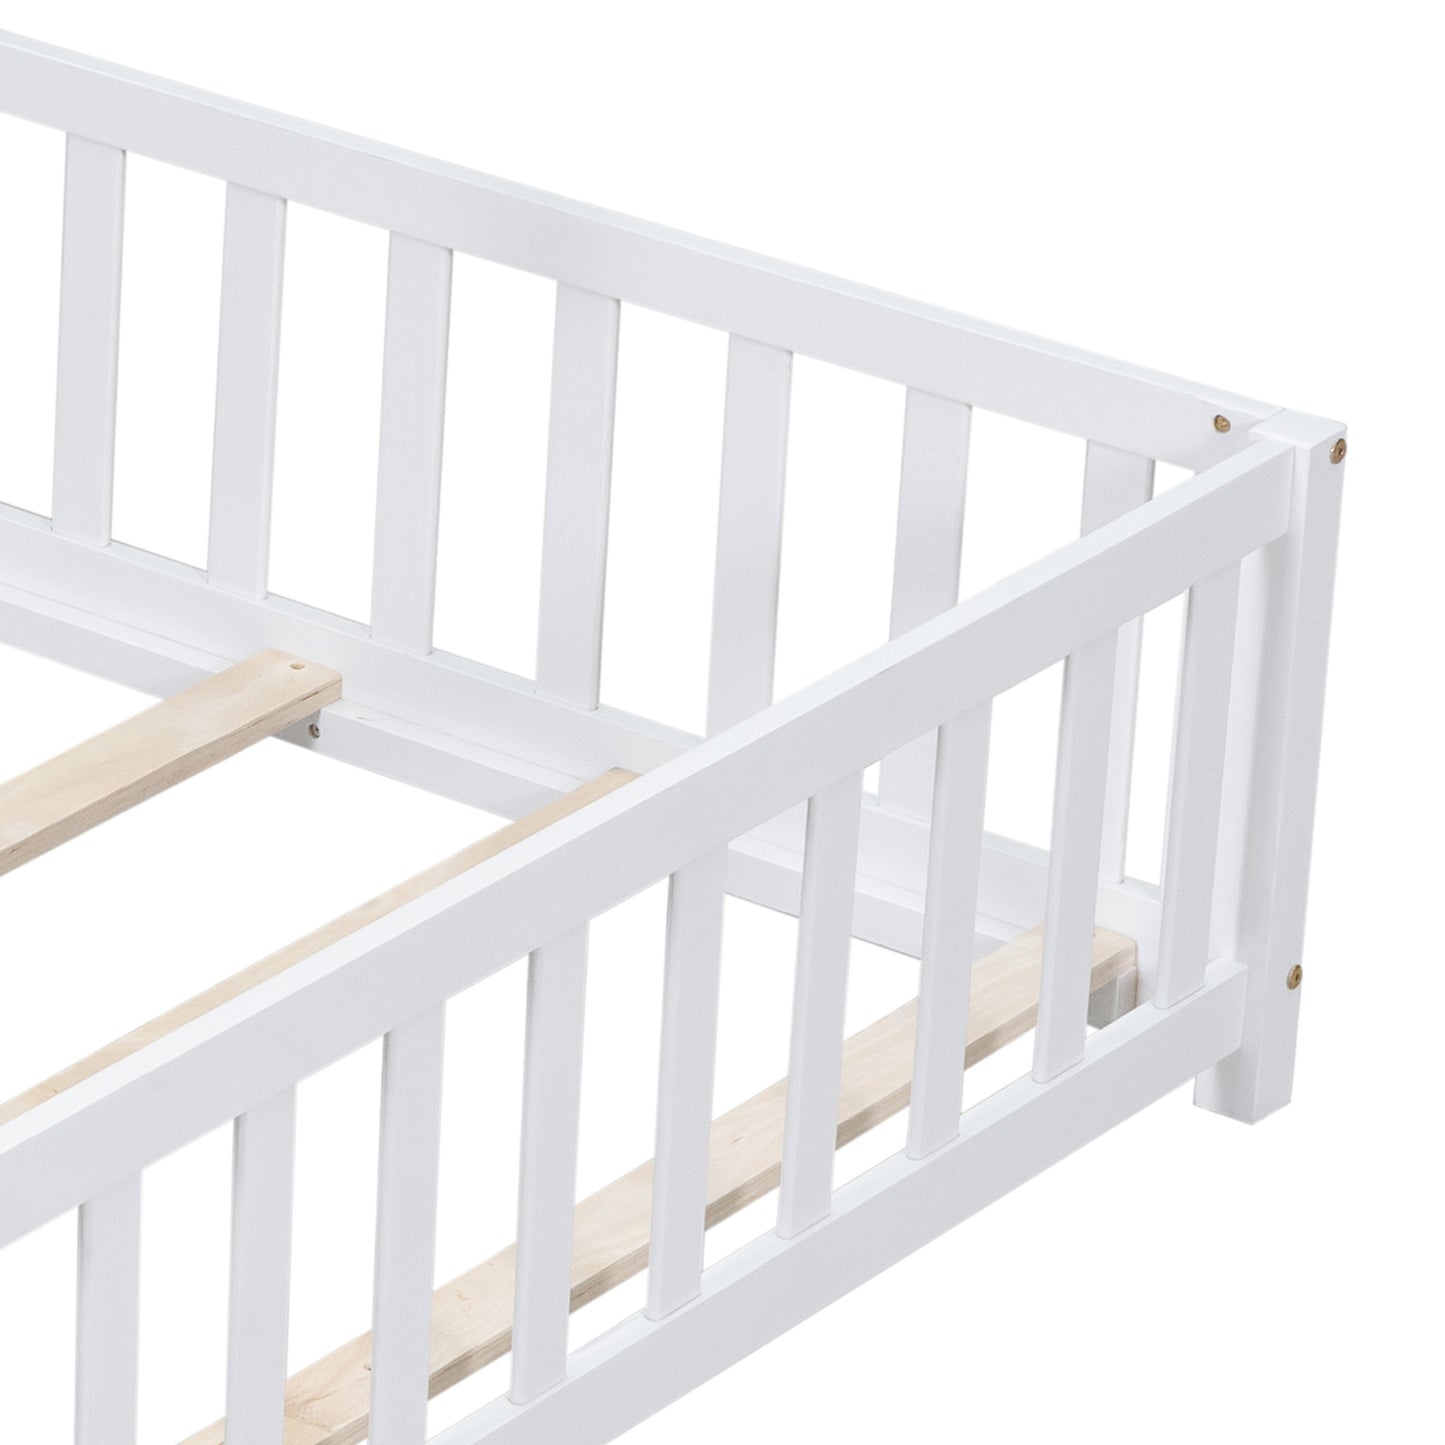 Full Size Floor Platform Bed with Fence and Door for Kids, Montessori Floor Bed Frame with Support Slats for Toddlers, Wooden Floor Bed White